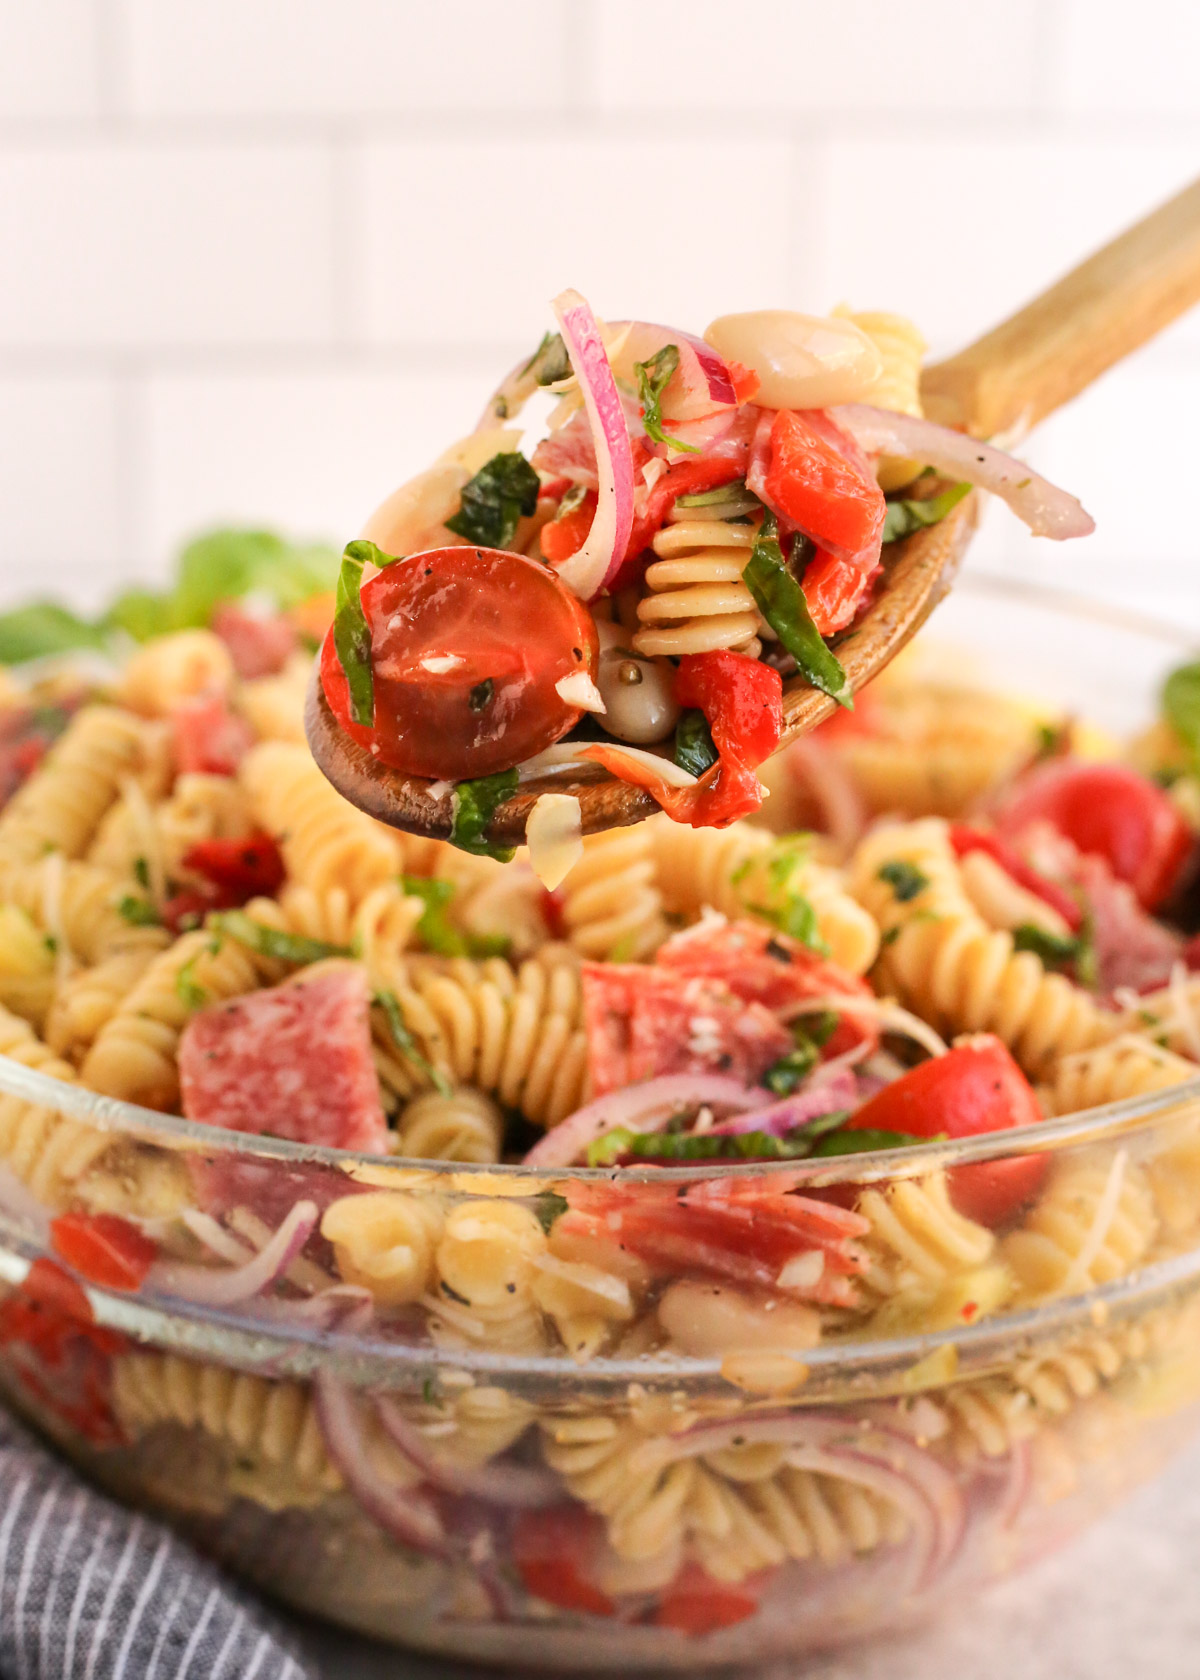 A wooden serving spoon lifts a spoonful of antipasto pasta salad out of the mixing bowl, showing a variety of ingredients like rotini pasta, cherry tomatoes, sliced red onions, chopped basil, and pepperoni